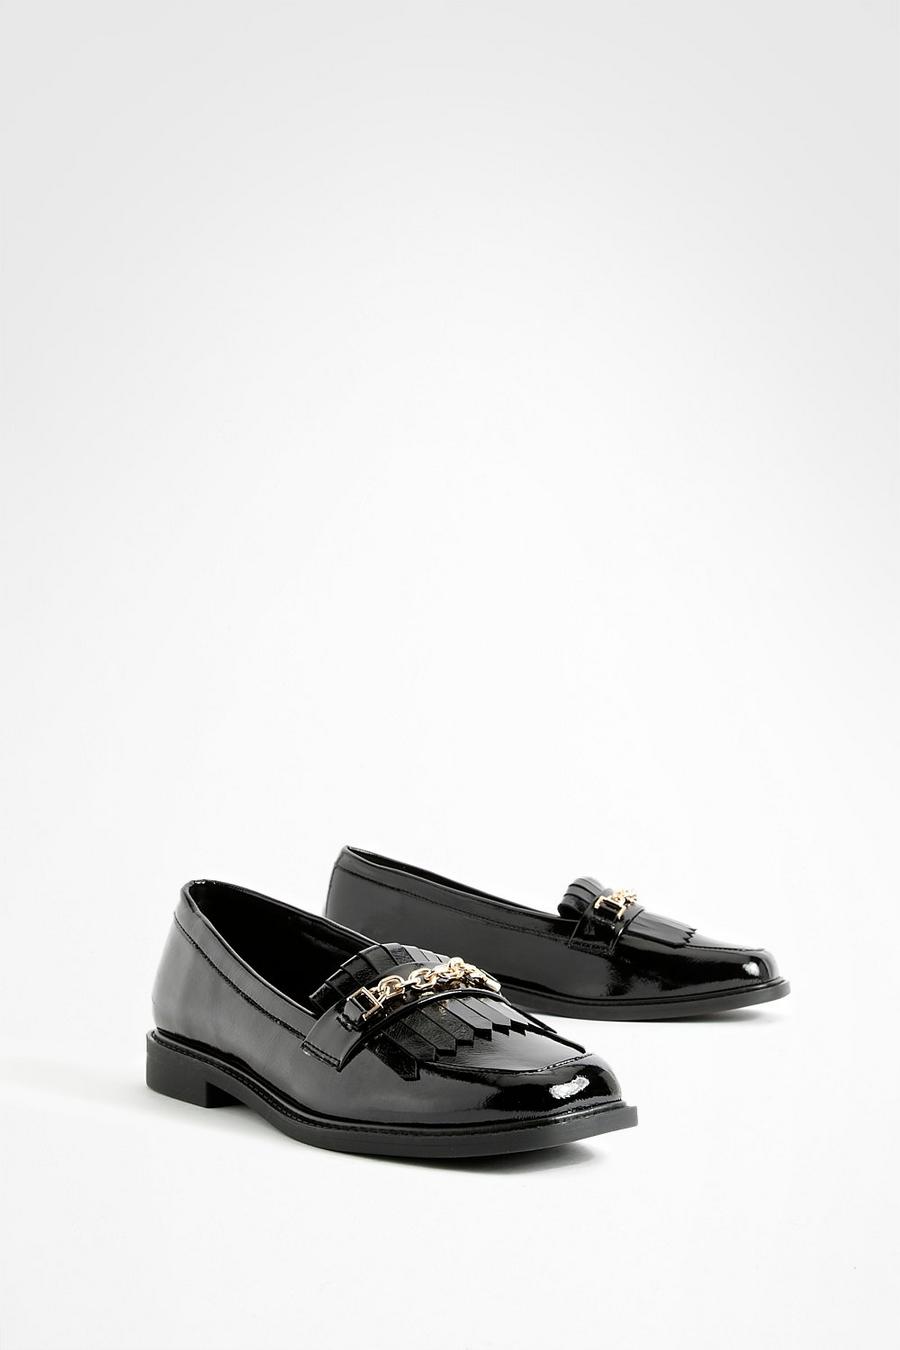 Black Patent Chain Trim Sqaure Toe Loafers 